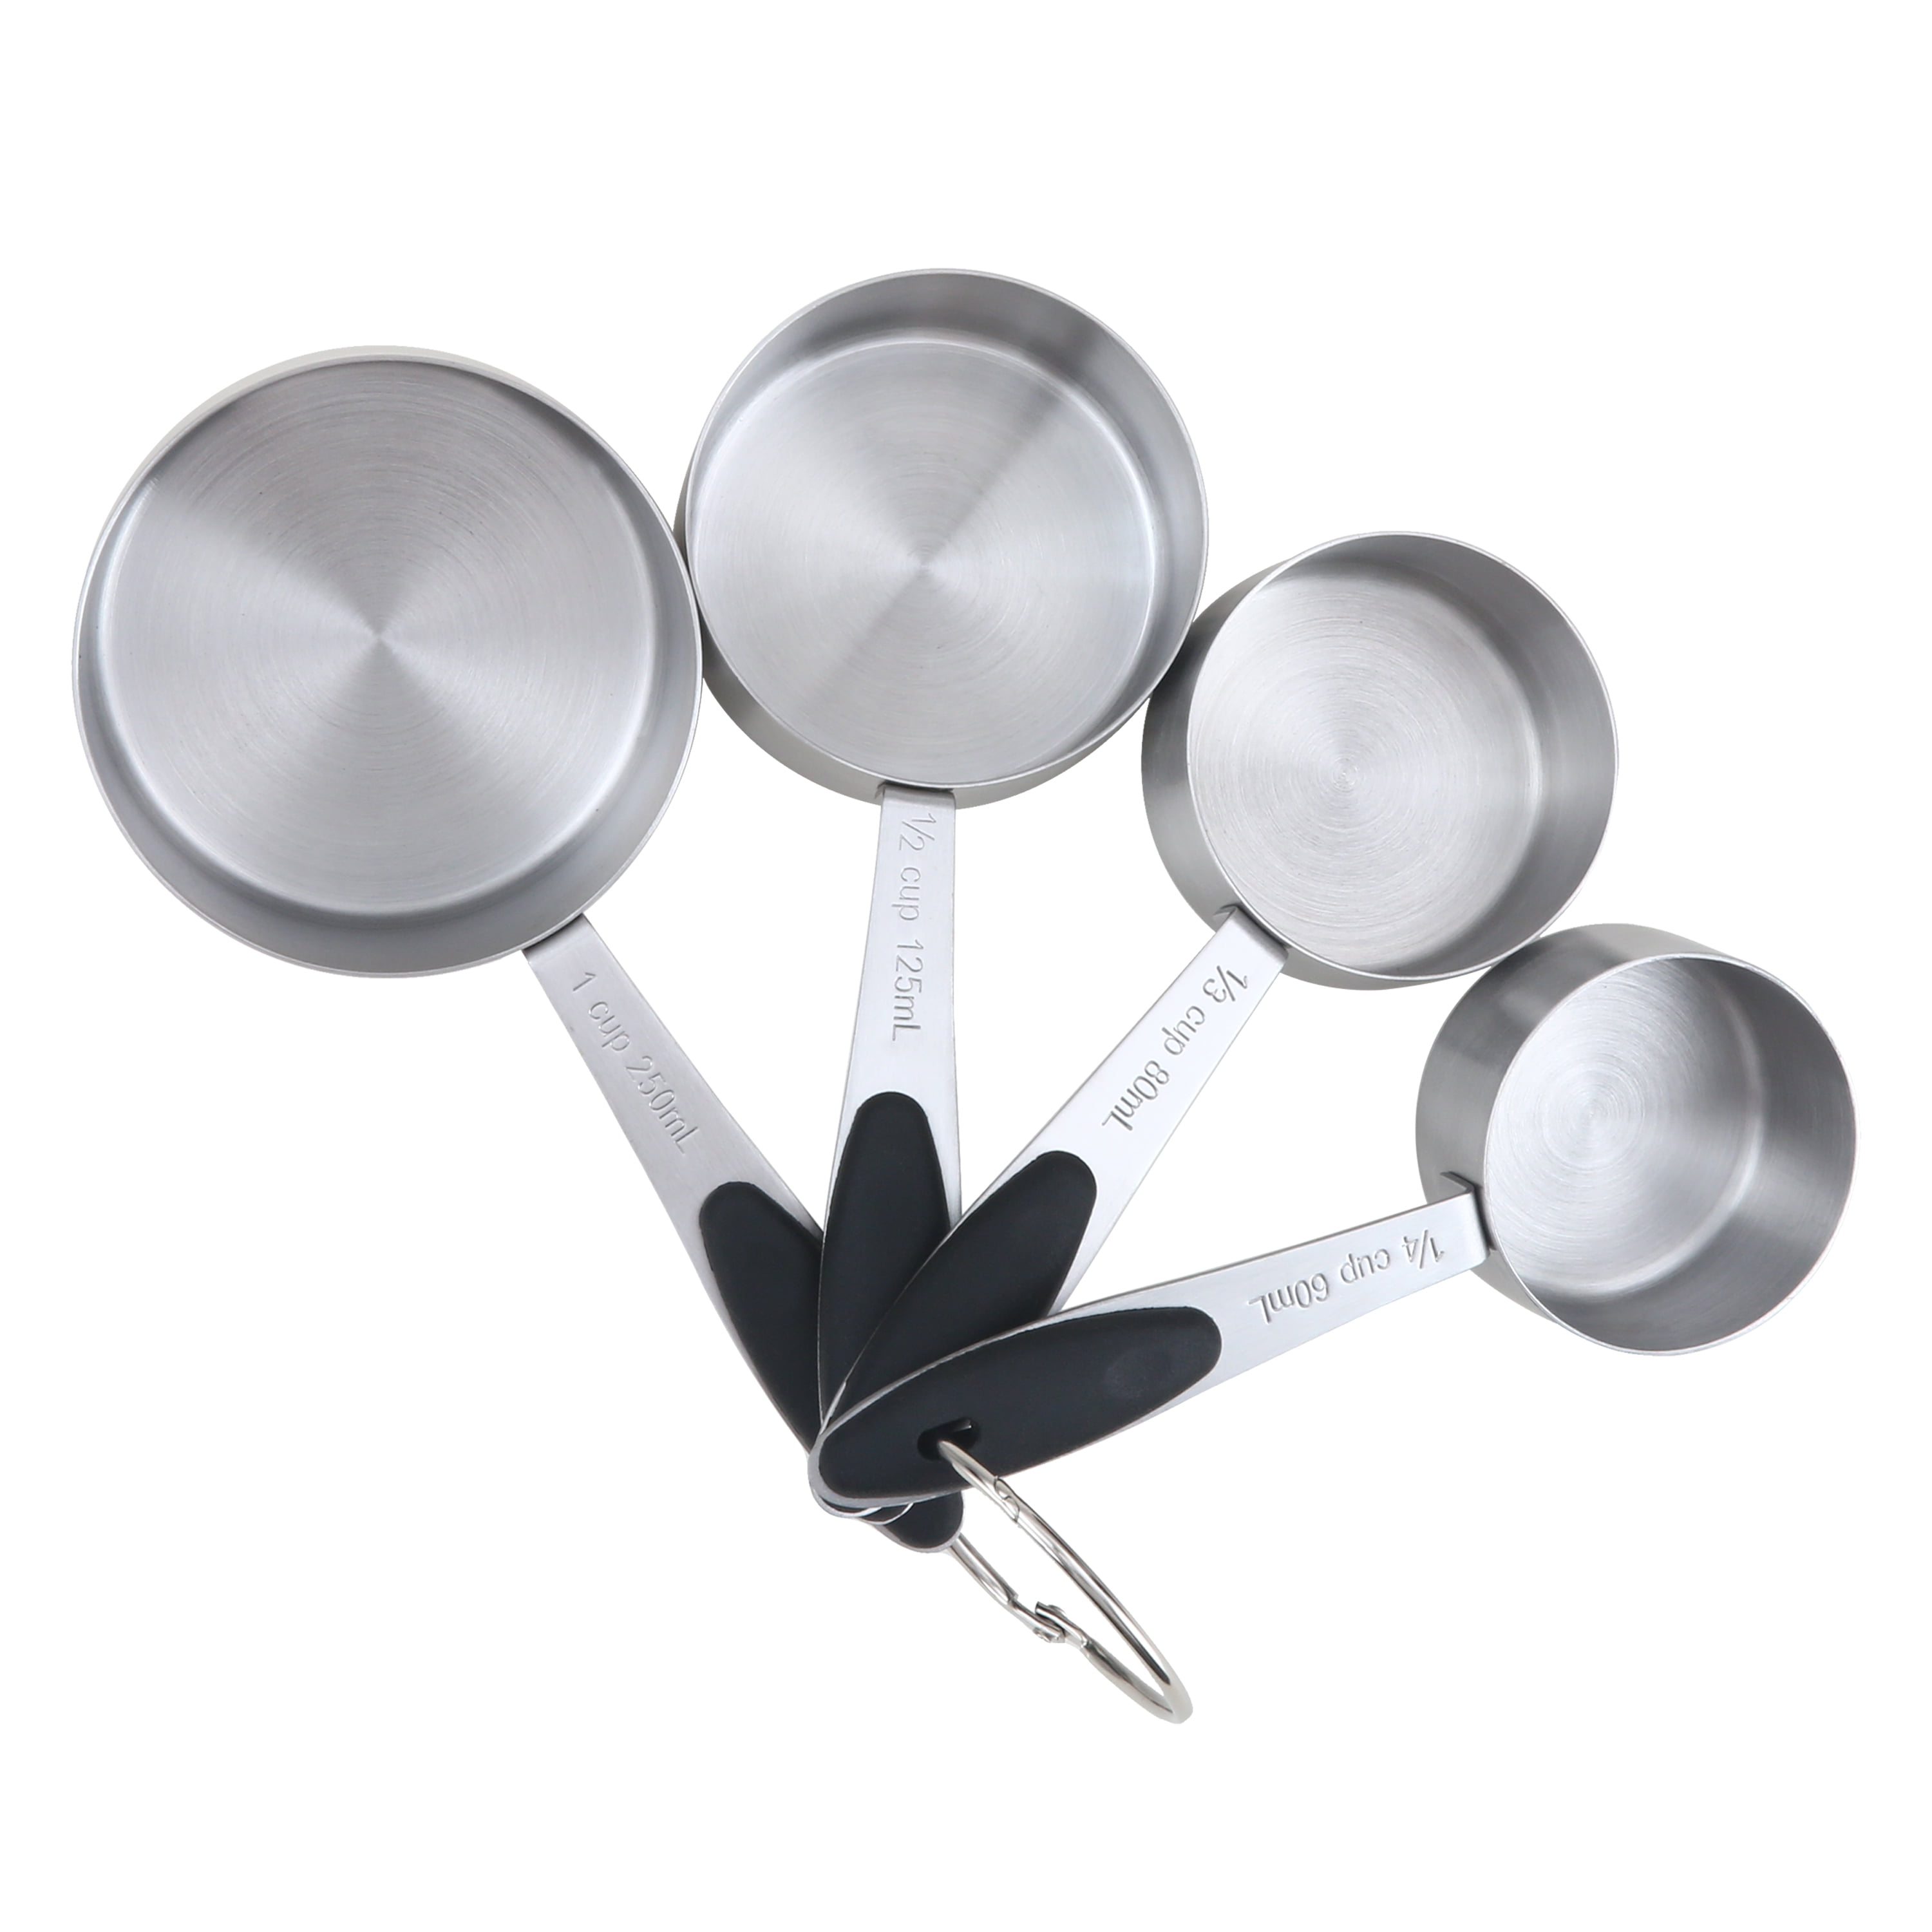 Culinary Edge 4 Piece Measuring Cup Sets - Stainless Steel Handles